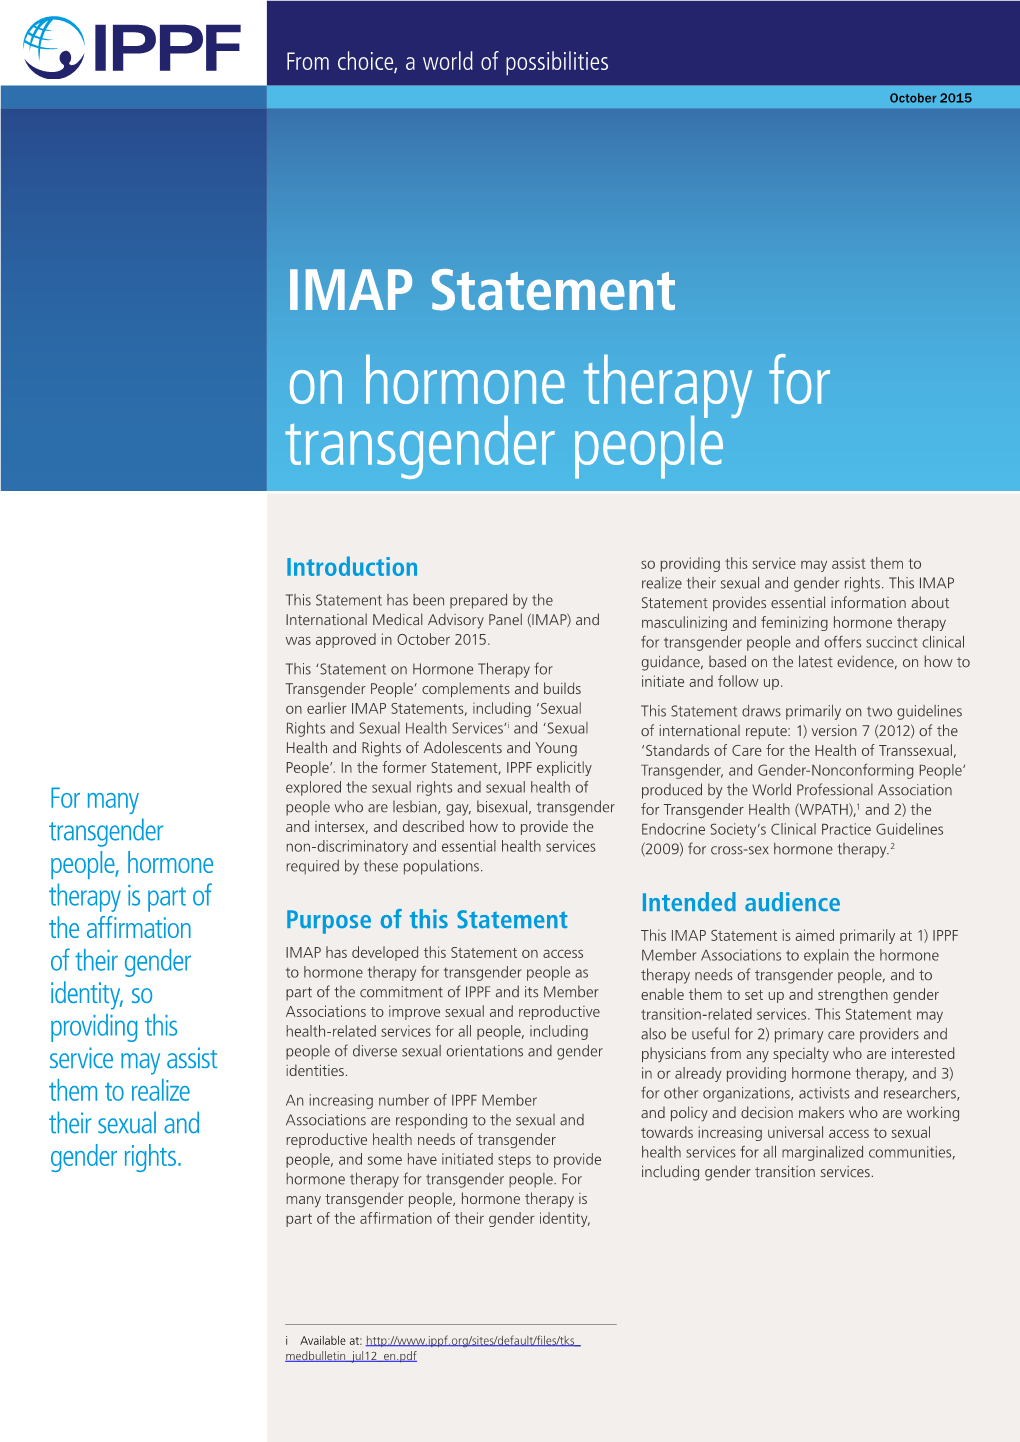 IMAP Statement on Hormone Therapy for Transgender People